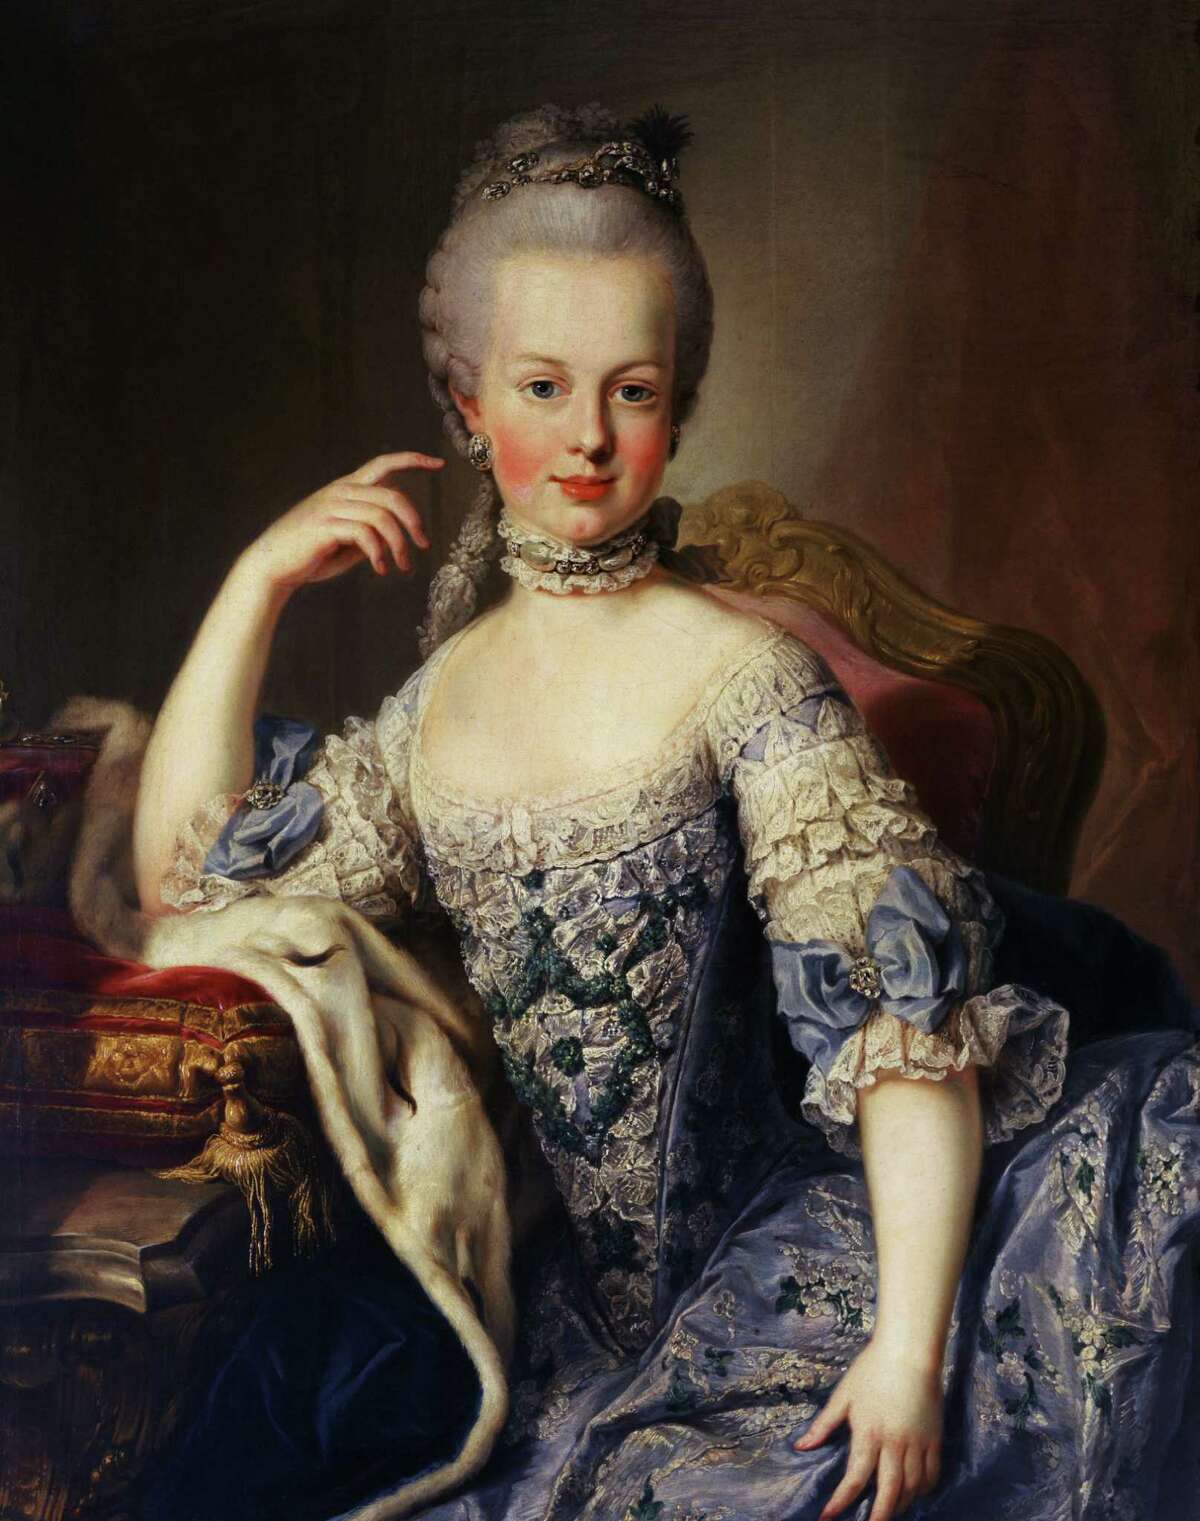 Marie-Antoinette The soon-to-be-headless queen of France, according to legend, arranged to have her six Angora cats shipped to the New World. They landed in Maine, where it is said they bred with local cats and produced the Maine Coon, one of the most popular cat breeds today.